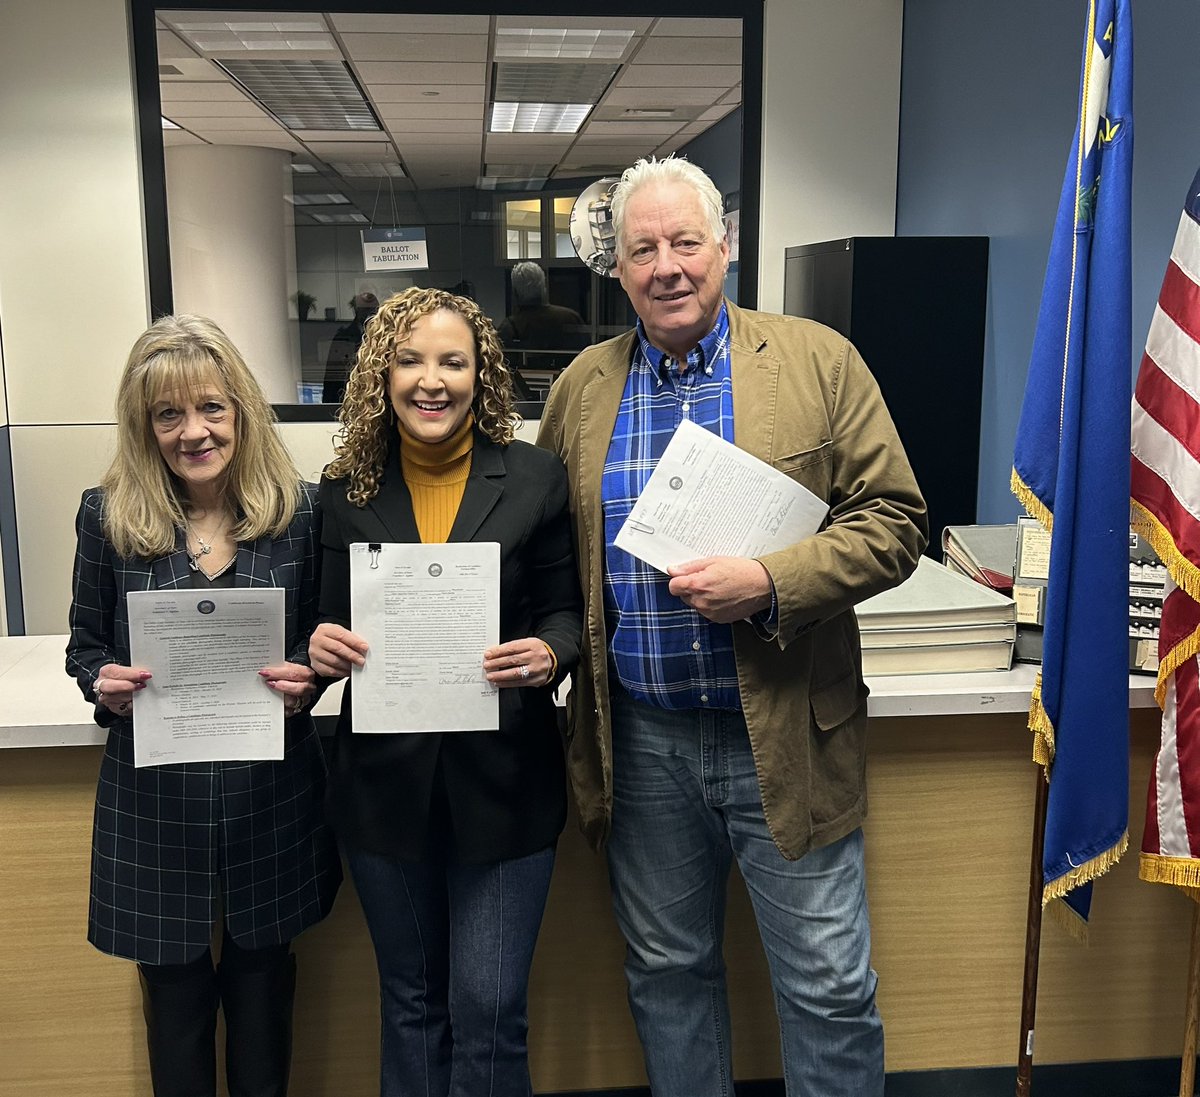 I’m so excited to officially file my candidacy for Assembly District 25 alongside my family, and members of the @NVGOPAssembly! The future is bright in the Silver State, and I can’t wait to work hard for all Nevadans!